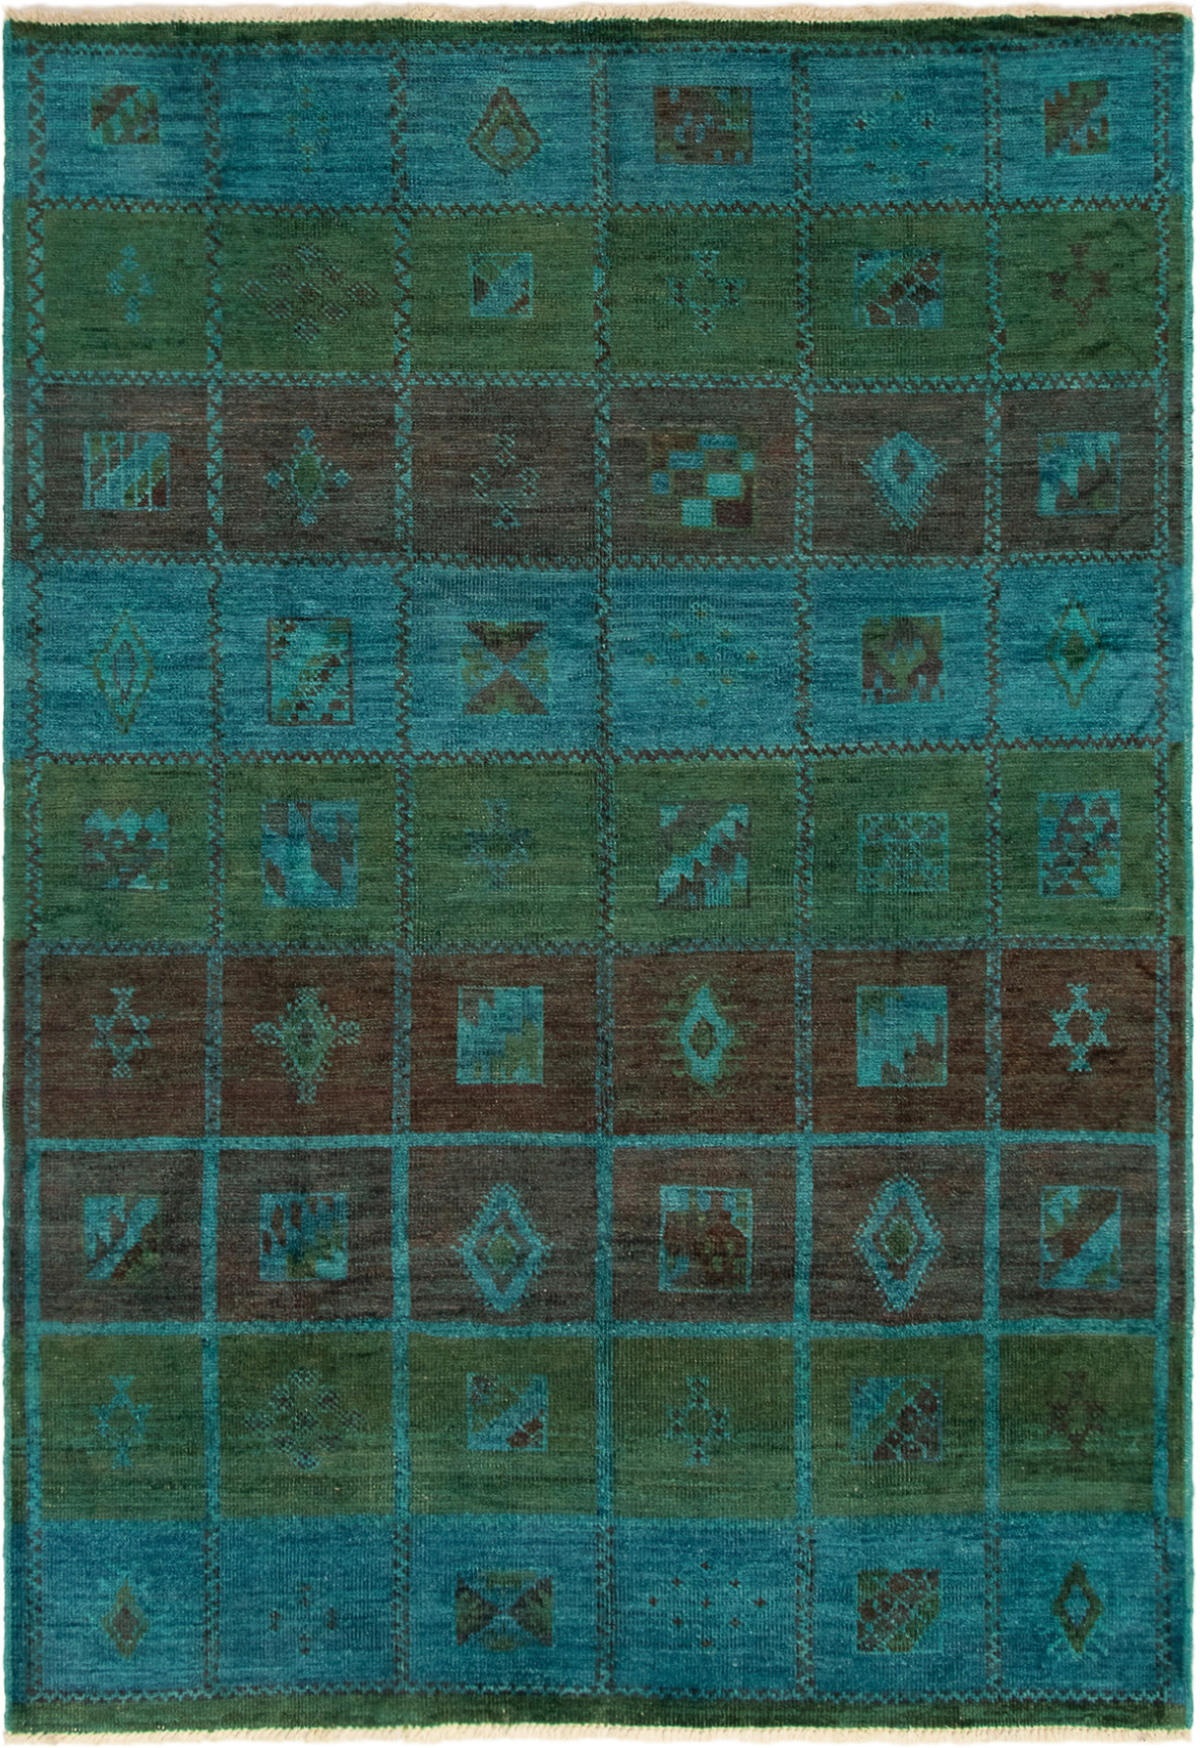 Hand-knotted Color transition Green, Turquoise Wool Rug 6'9" x 9'4" Size: 6'9" x 9'4"  